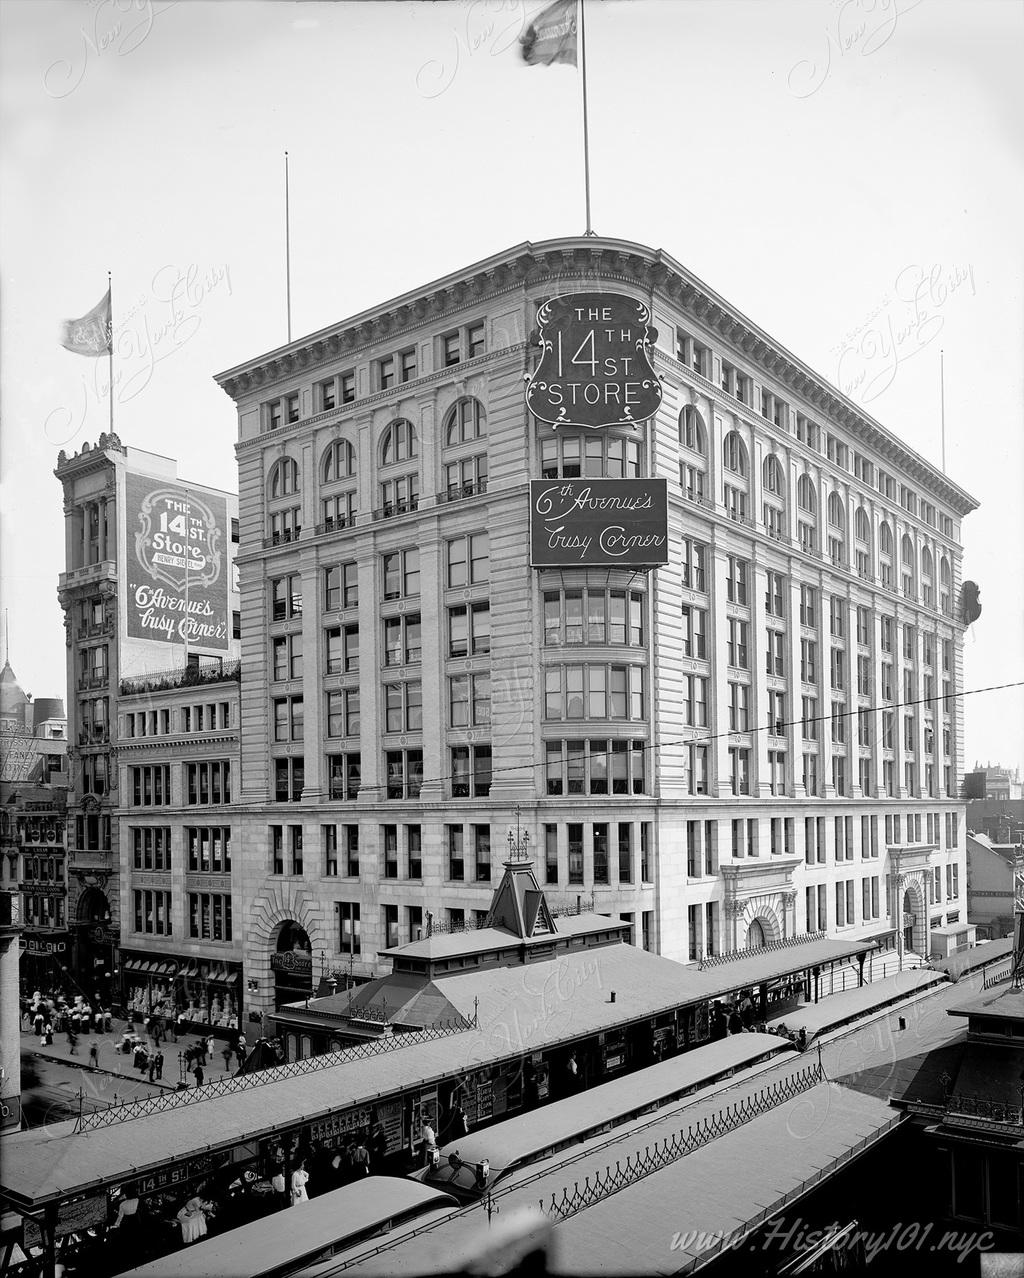 Henry Seigel's 14th Street Store, opened in 1904 on Sixth Avenue between 13th and 14th Streets.